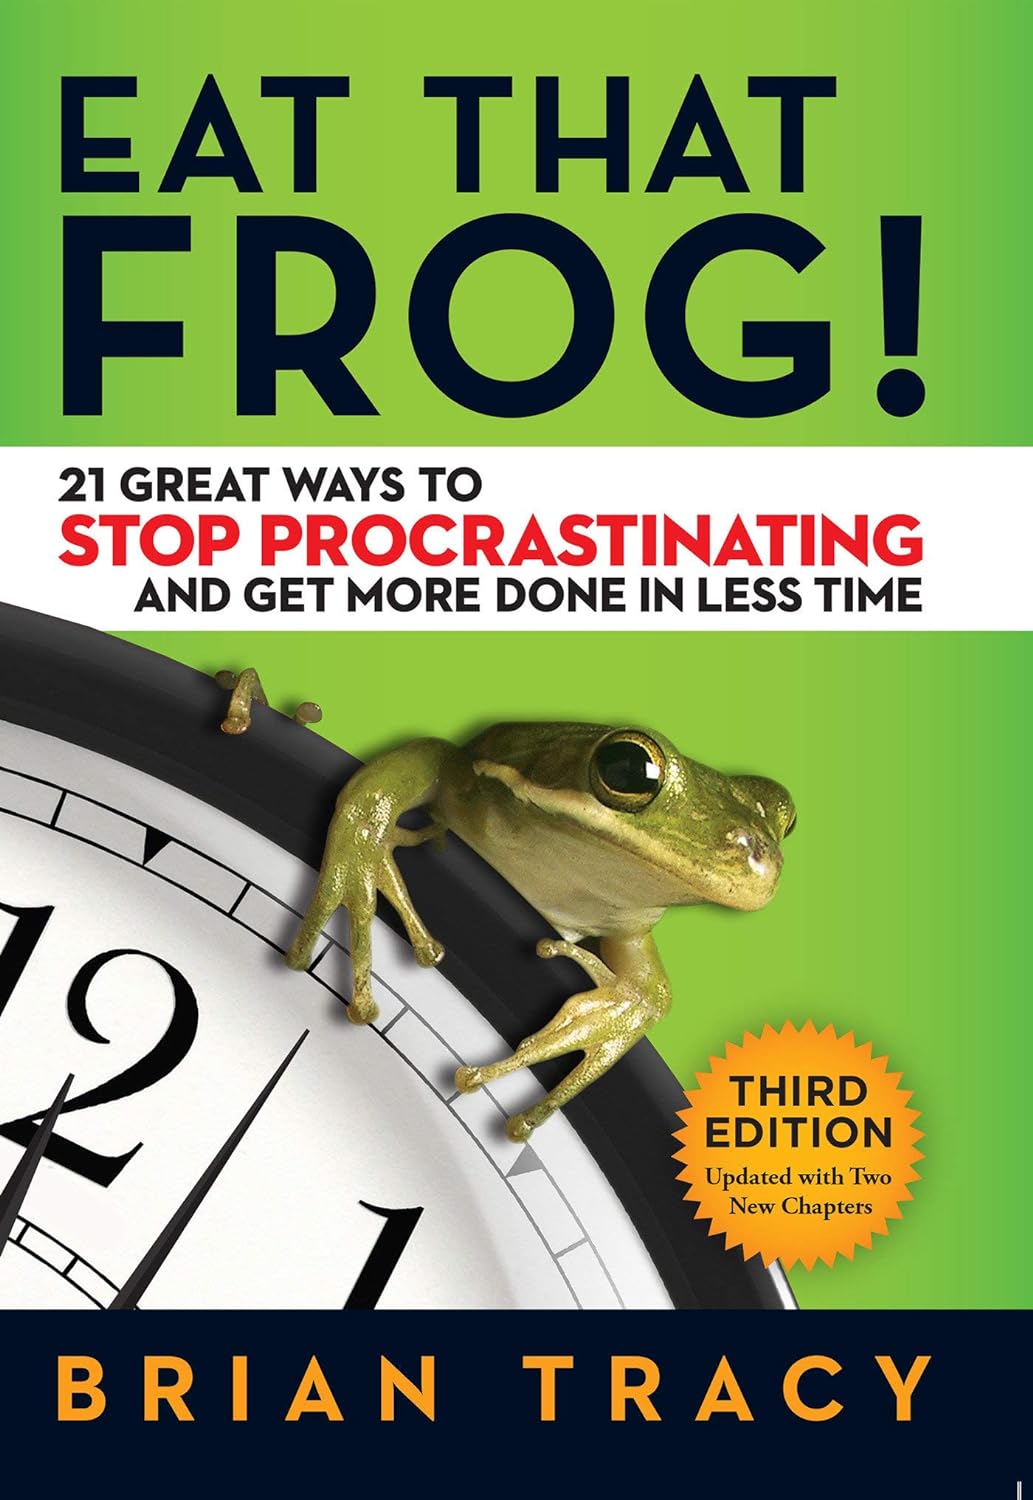 Brian Tracy - Eat That Frog. 21 Great Ways to Stop Procrastinating and Get More Done in Less Time